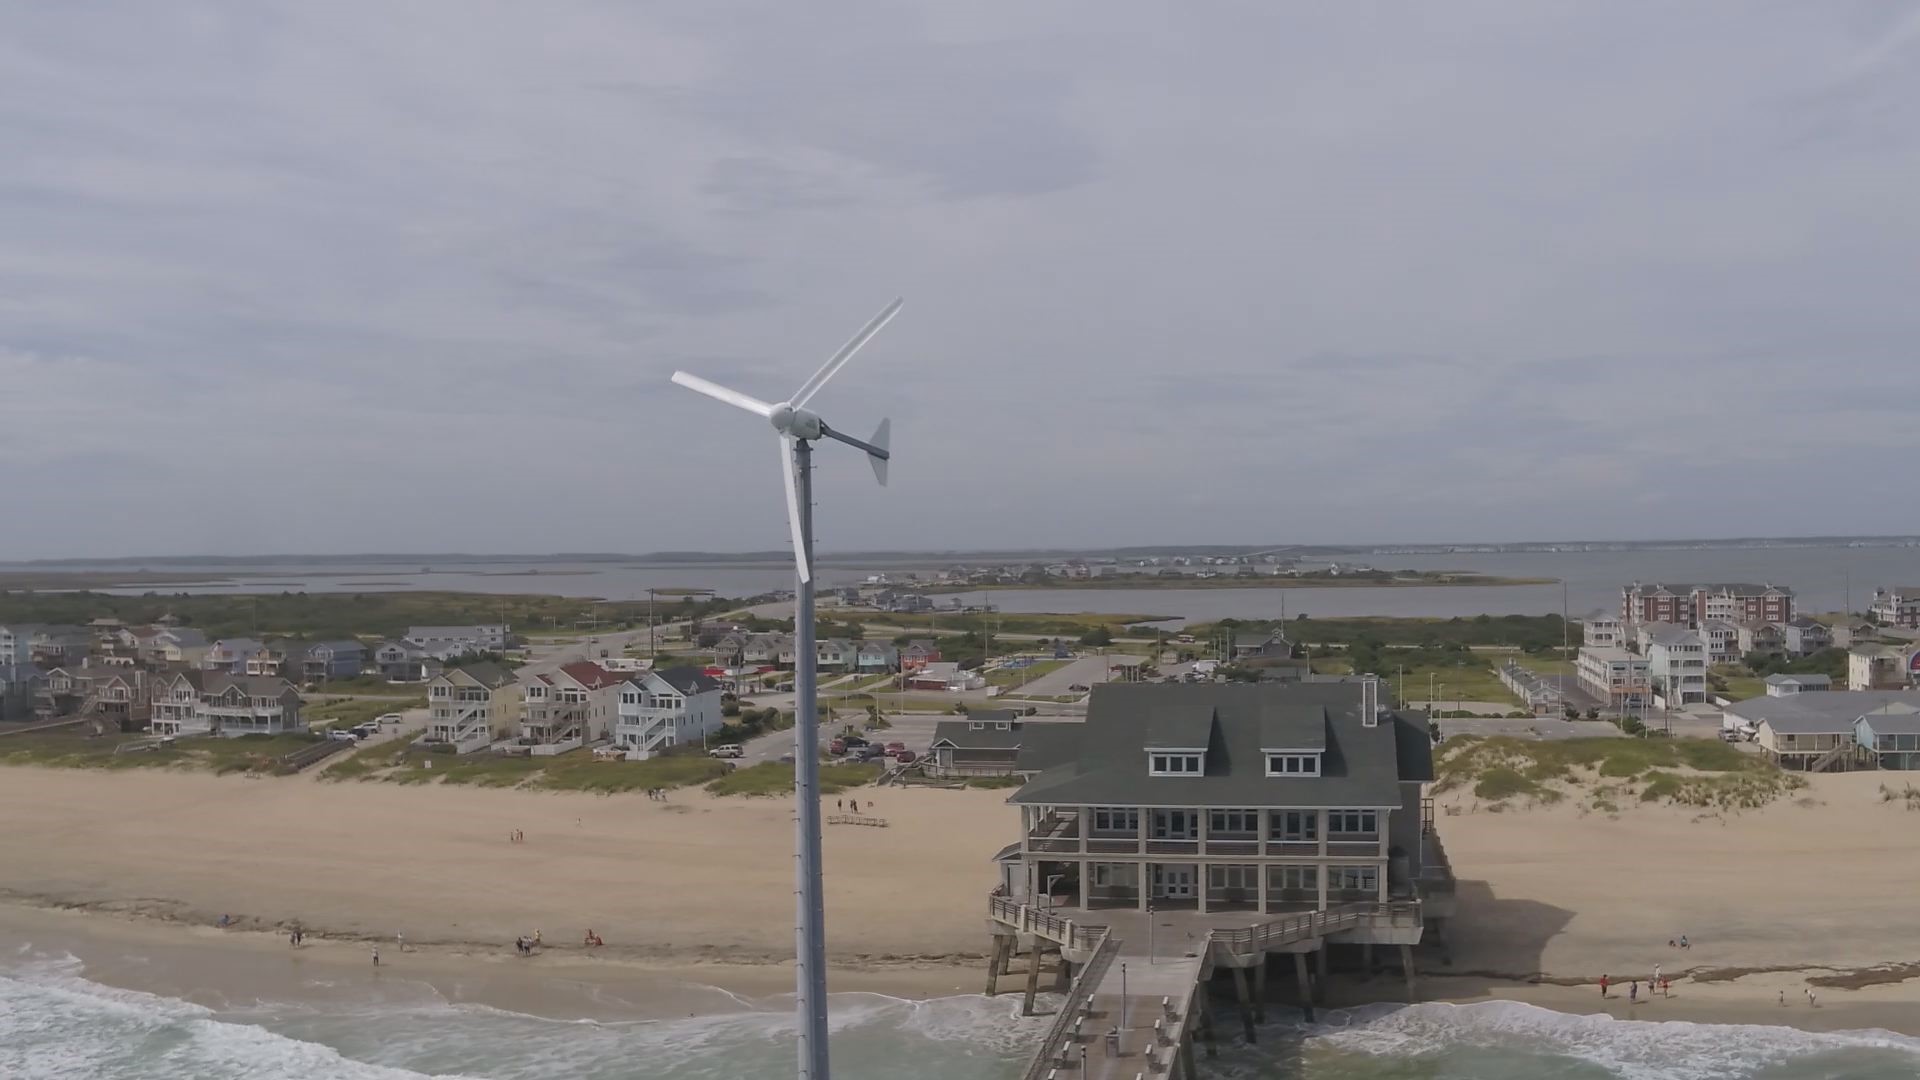 A look at the weather conditions in Nags Head, North Carolina as Hurricane Dorian moves closer to the Outer Banks. Video courtesy Andy Pierrotti, 11Alive